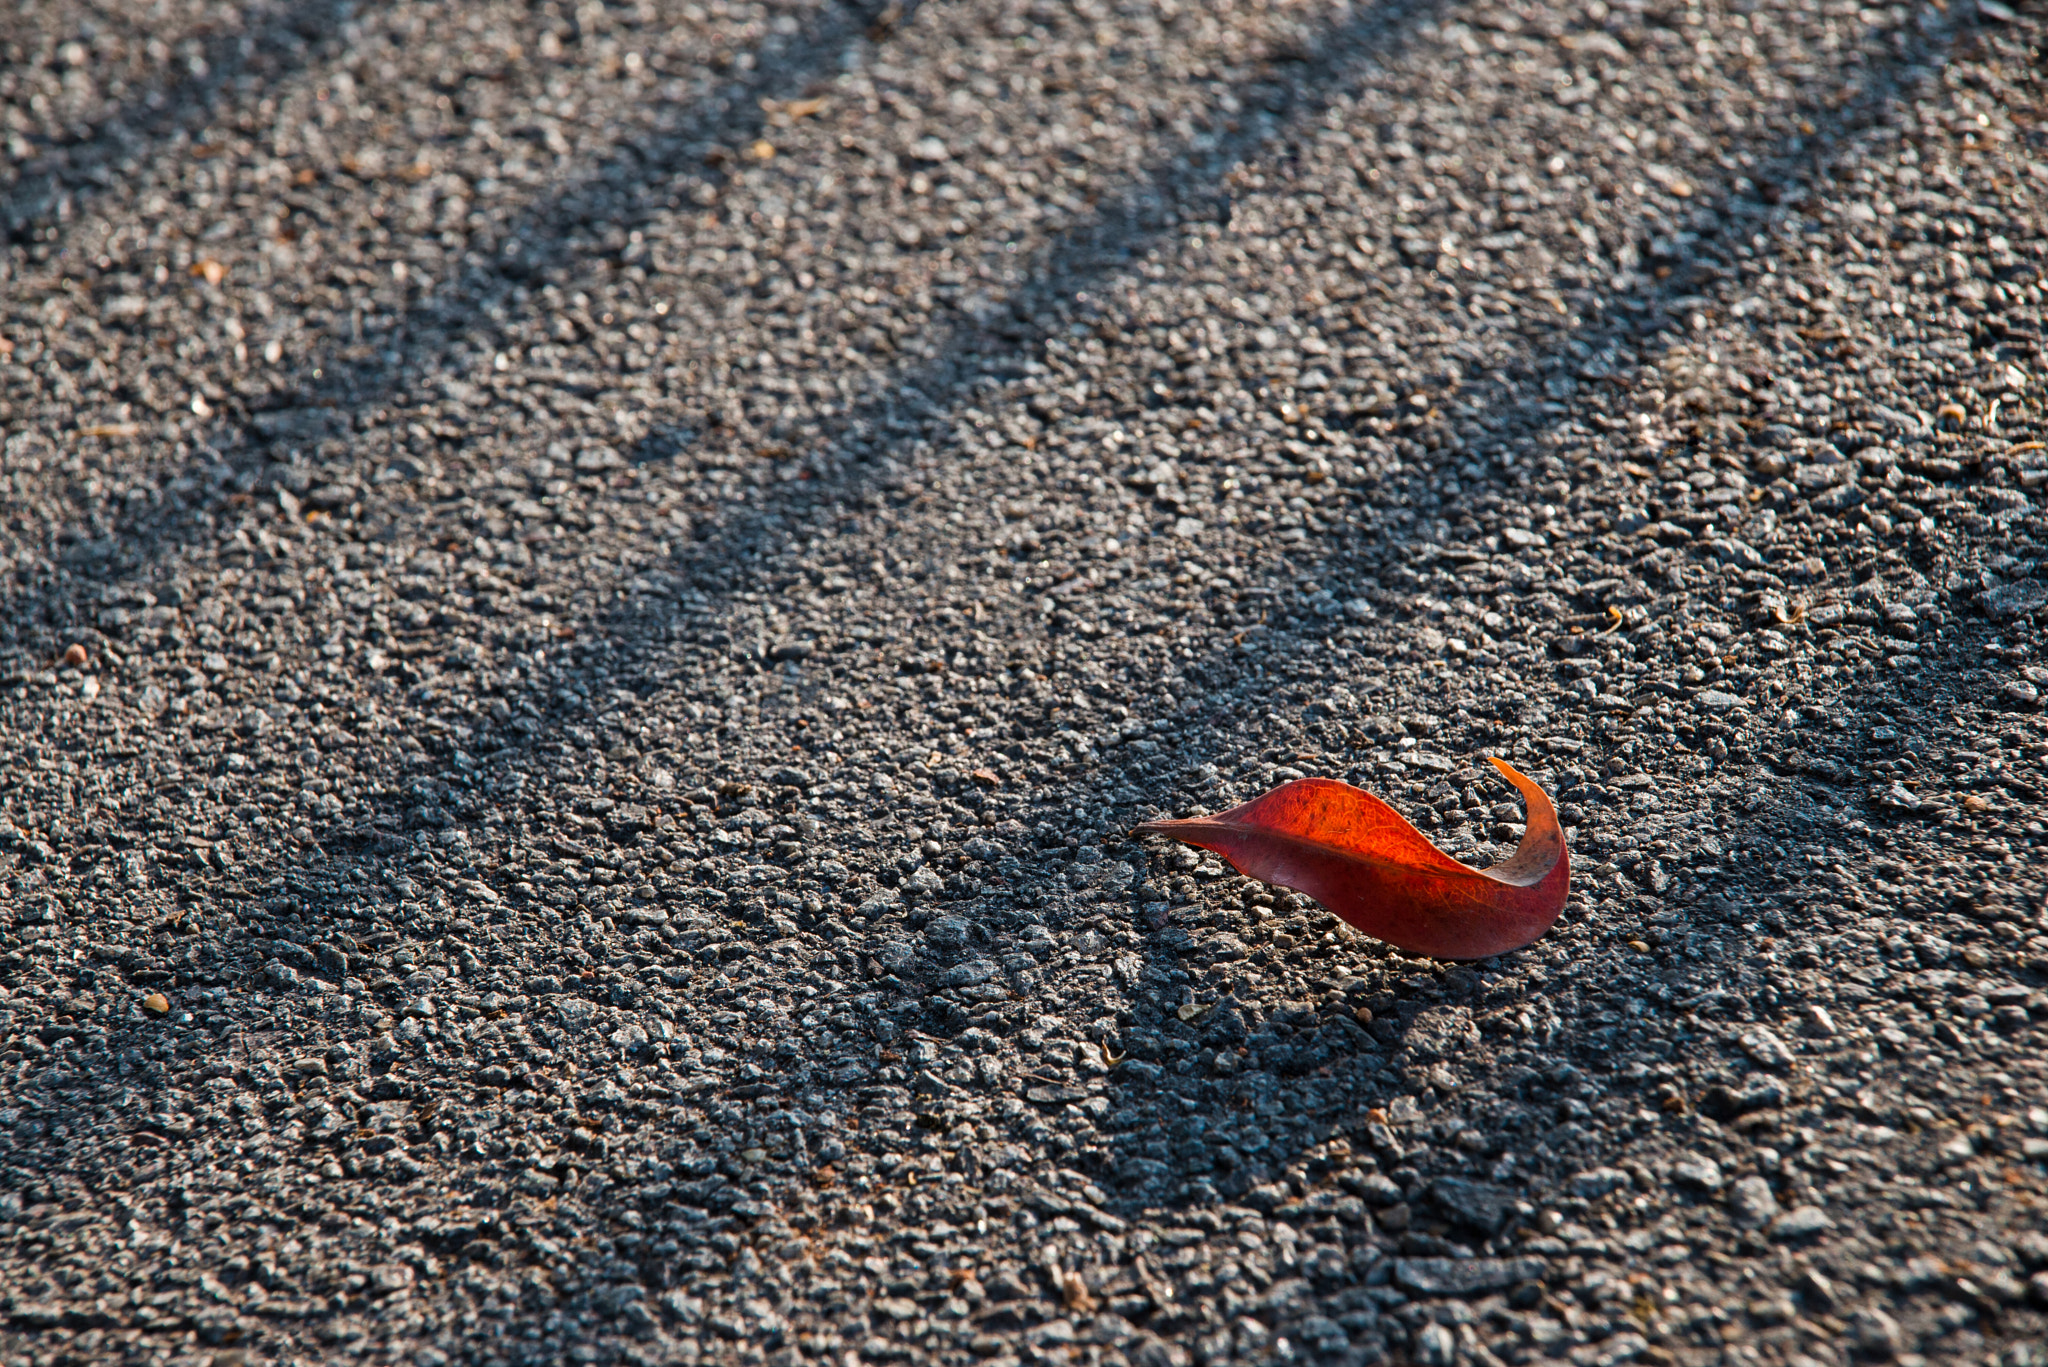 Tamron SP AF 24-135mm f/3.5-5.6 AD Aspherical (IF) Macro (190D) sample photo. Red leaf fallen on pavement photography